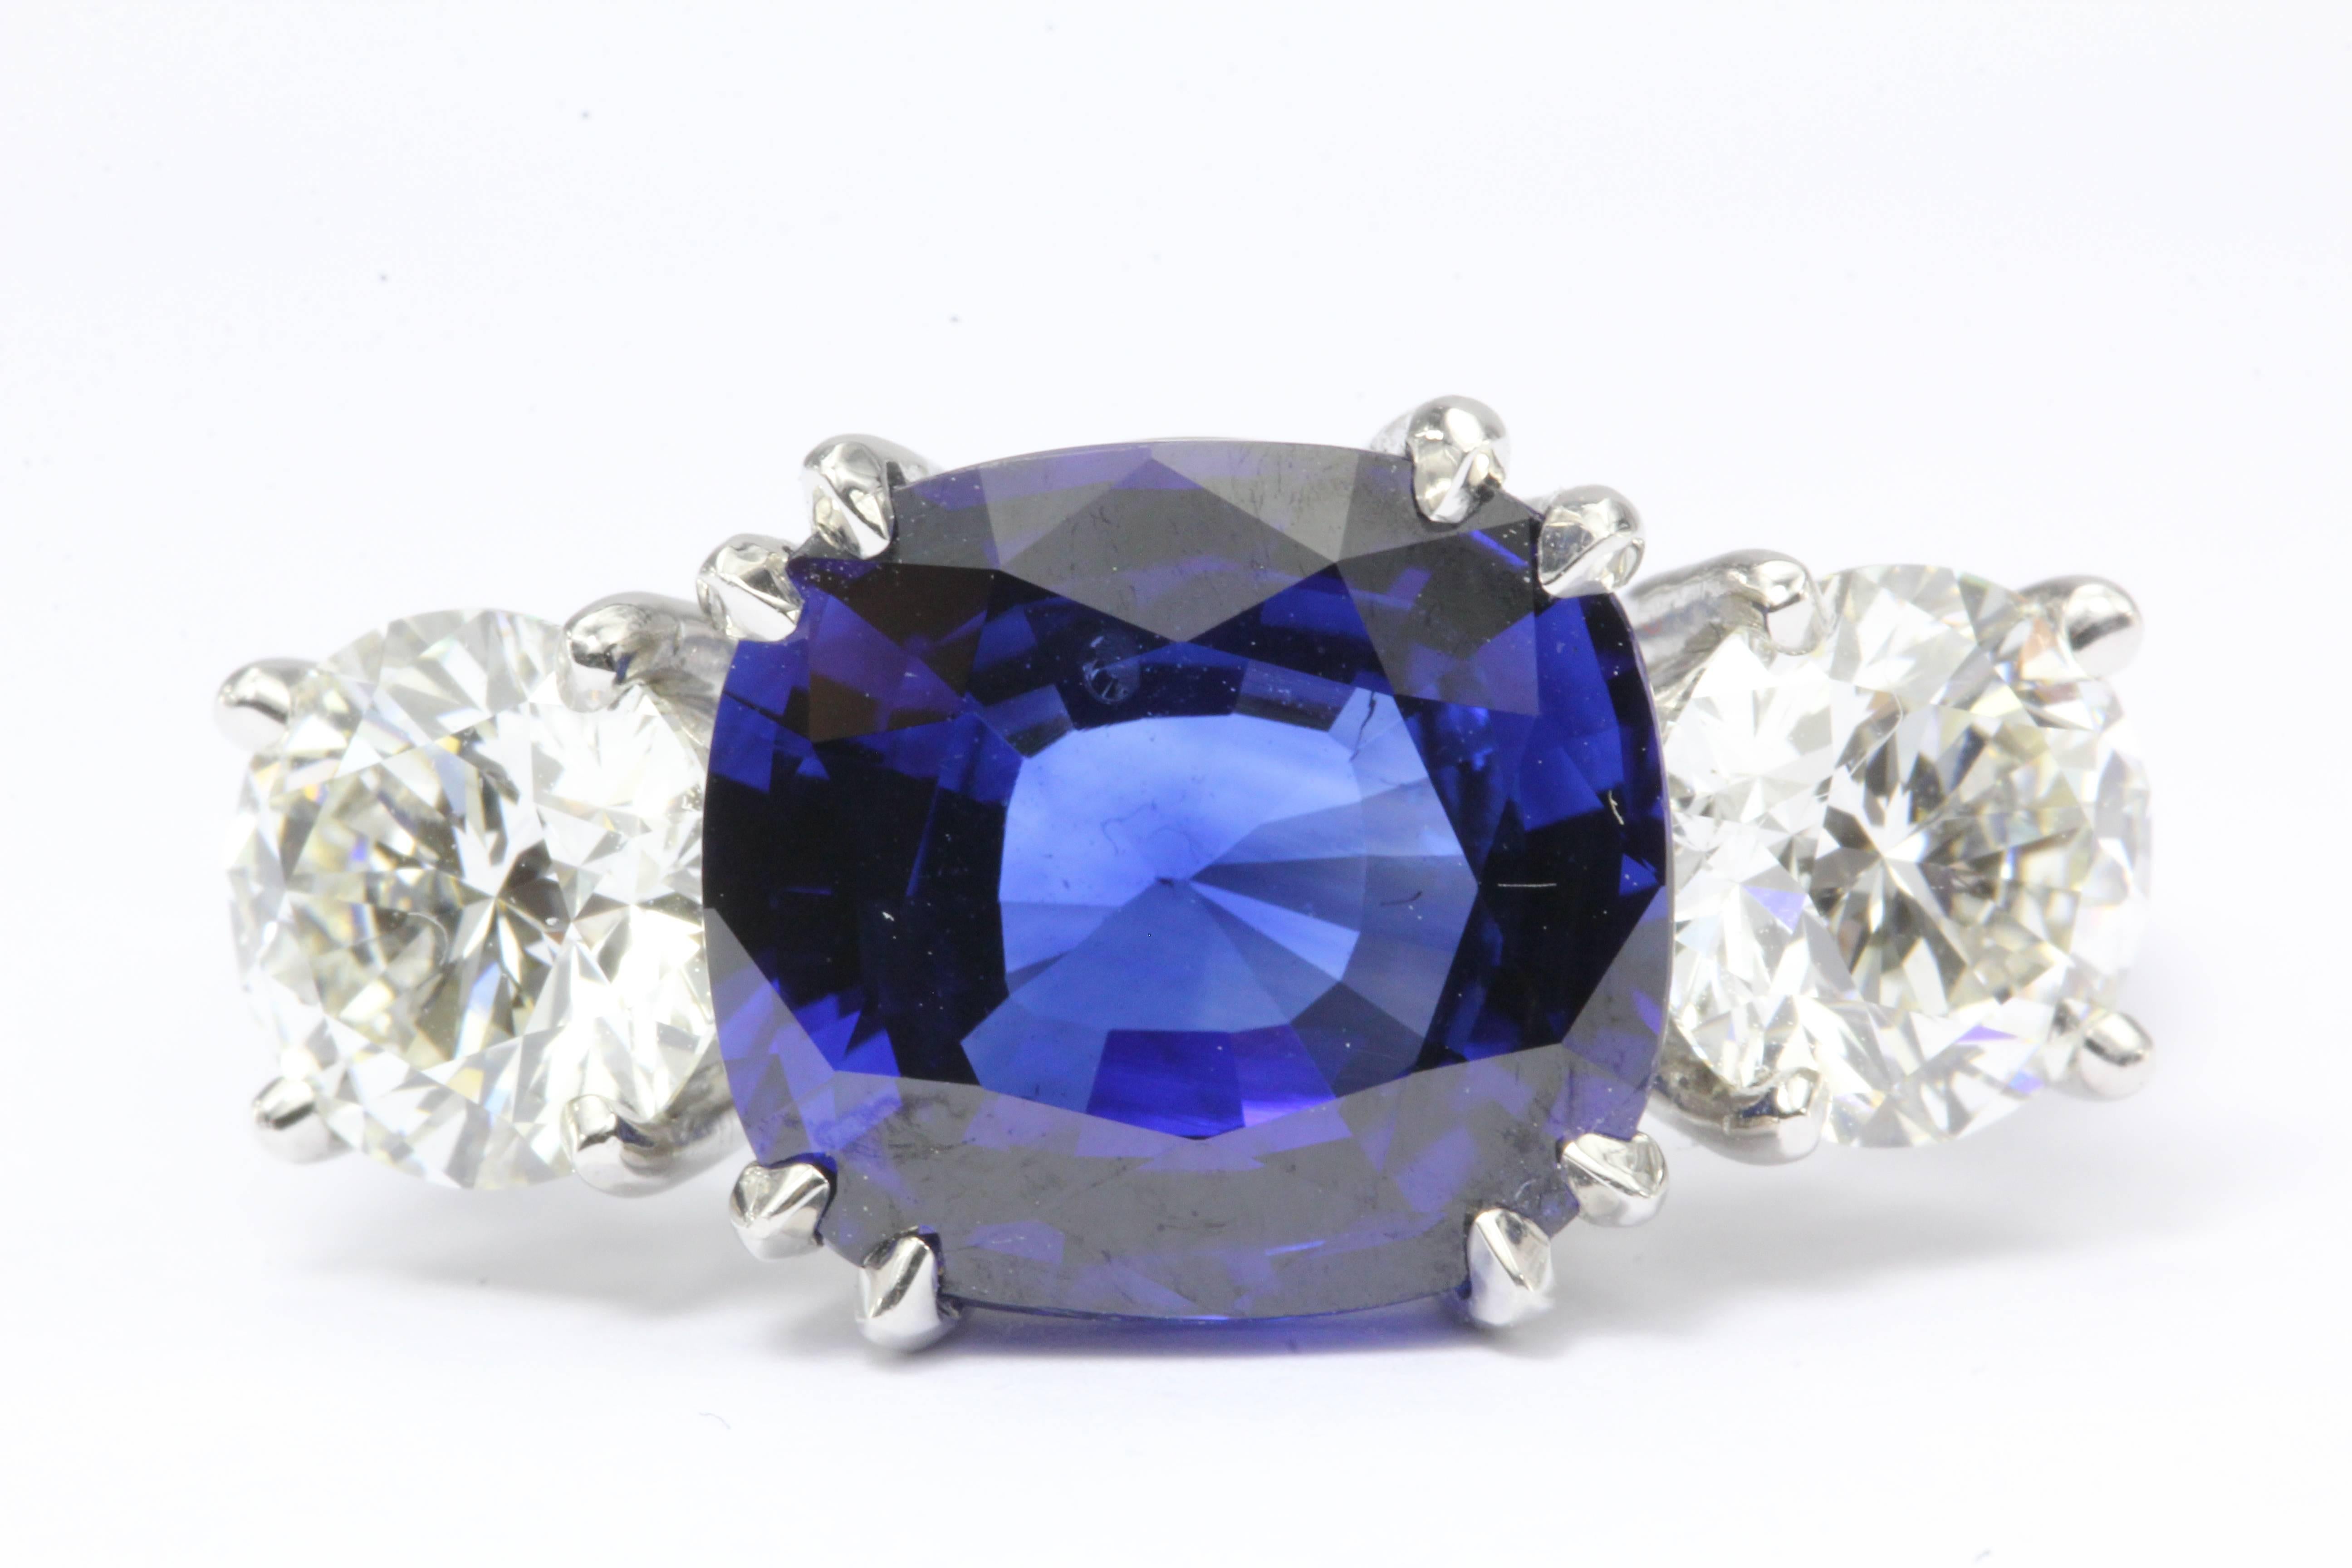 A stunning and beautiful engagement ring is set with a large brilliant vivid blue sapphire. The setting is platinum, the natural blue sapphire is 4.75 carats (10.58 x 9.64 x 5.05mm) and flanked by two 1 carat round brilliant diamonds (2 carats total